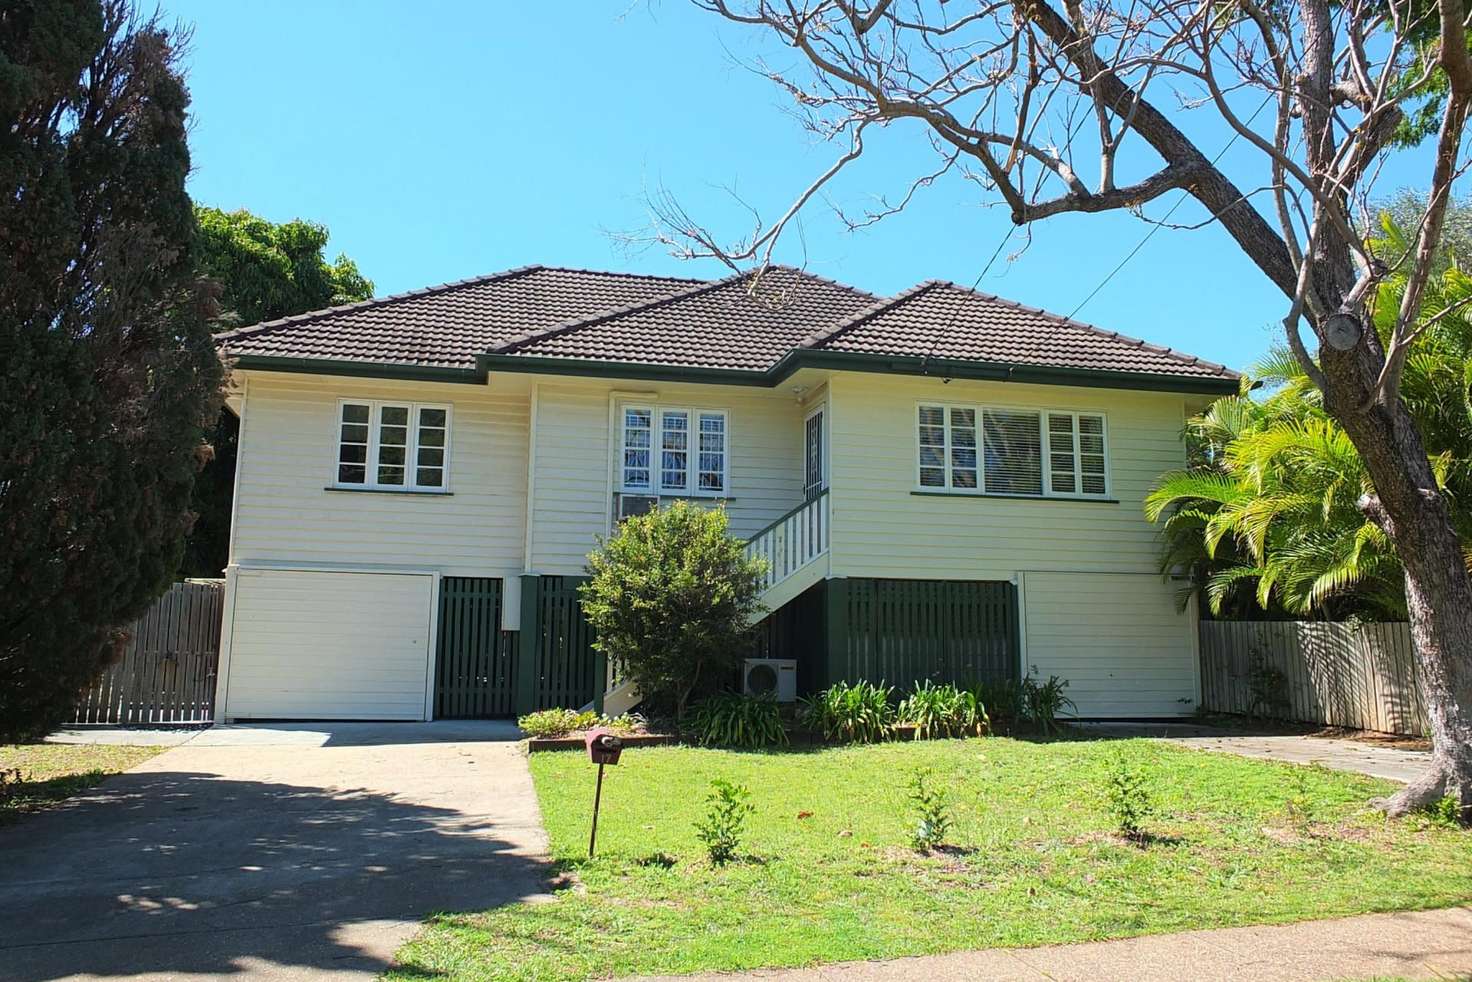 Main view of Homely house listing, 17 Hutton Rd, Aspley QLD 4034